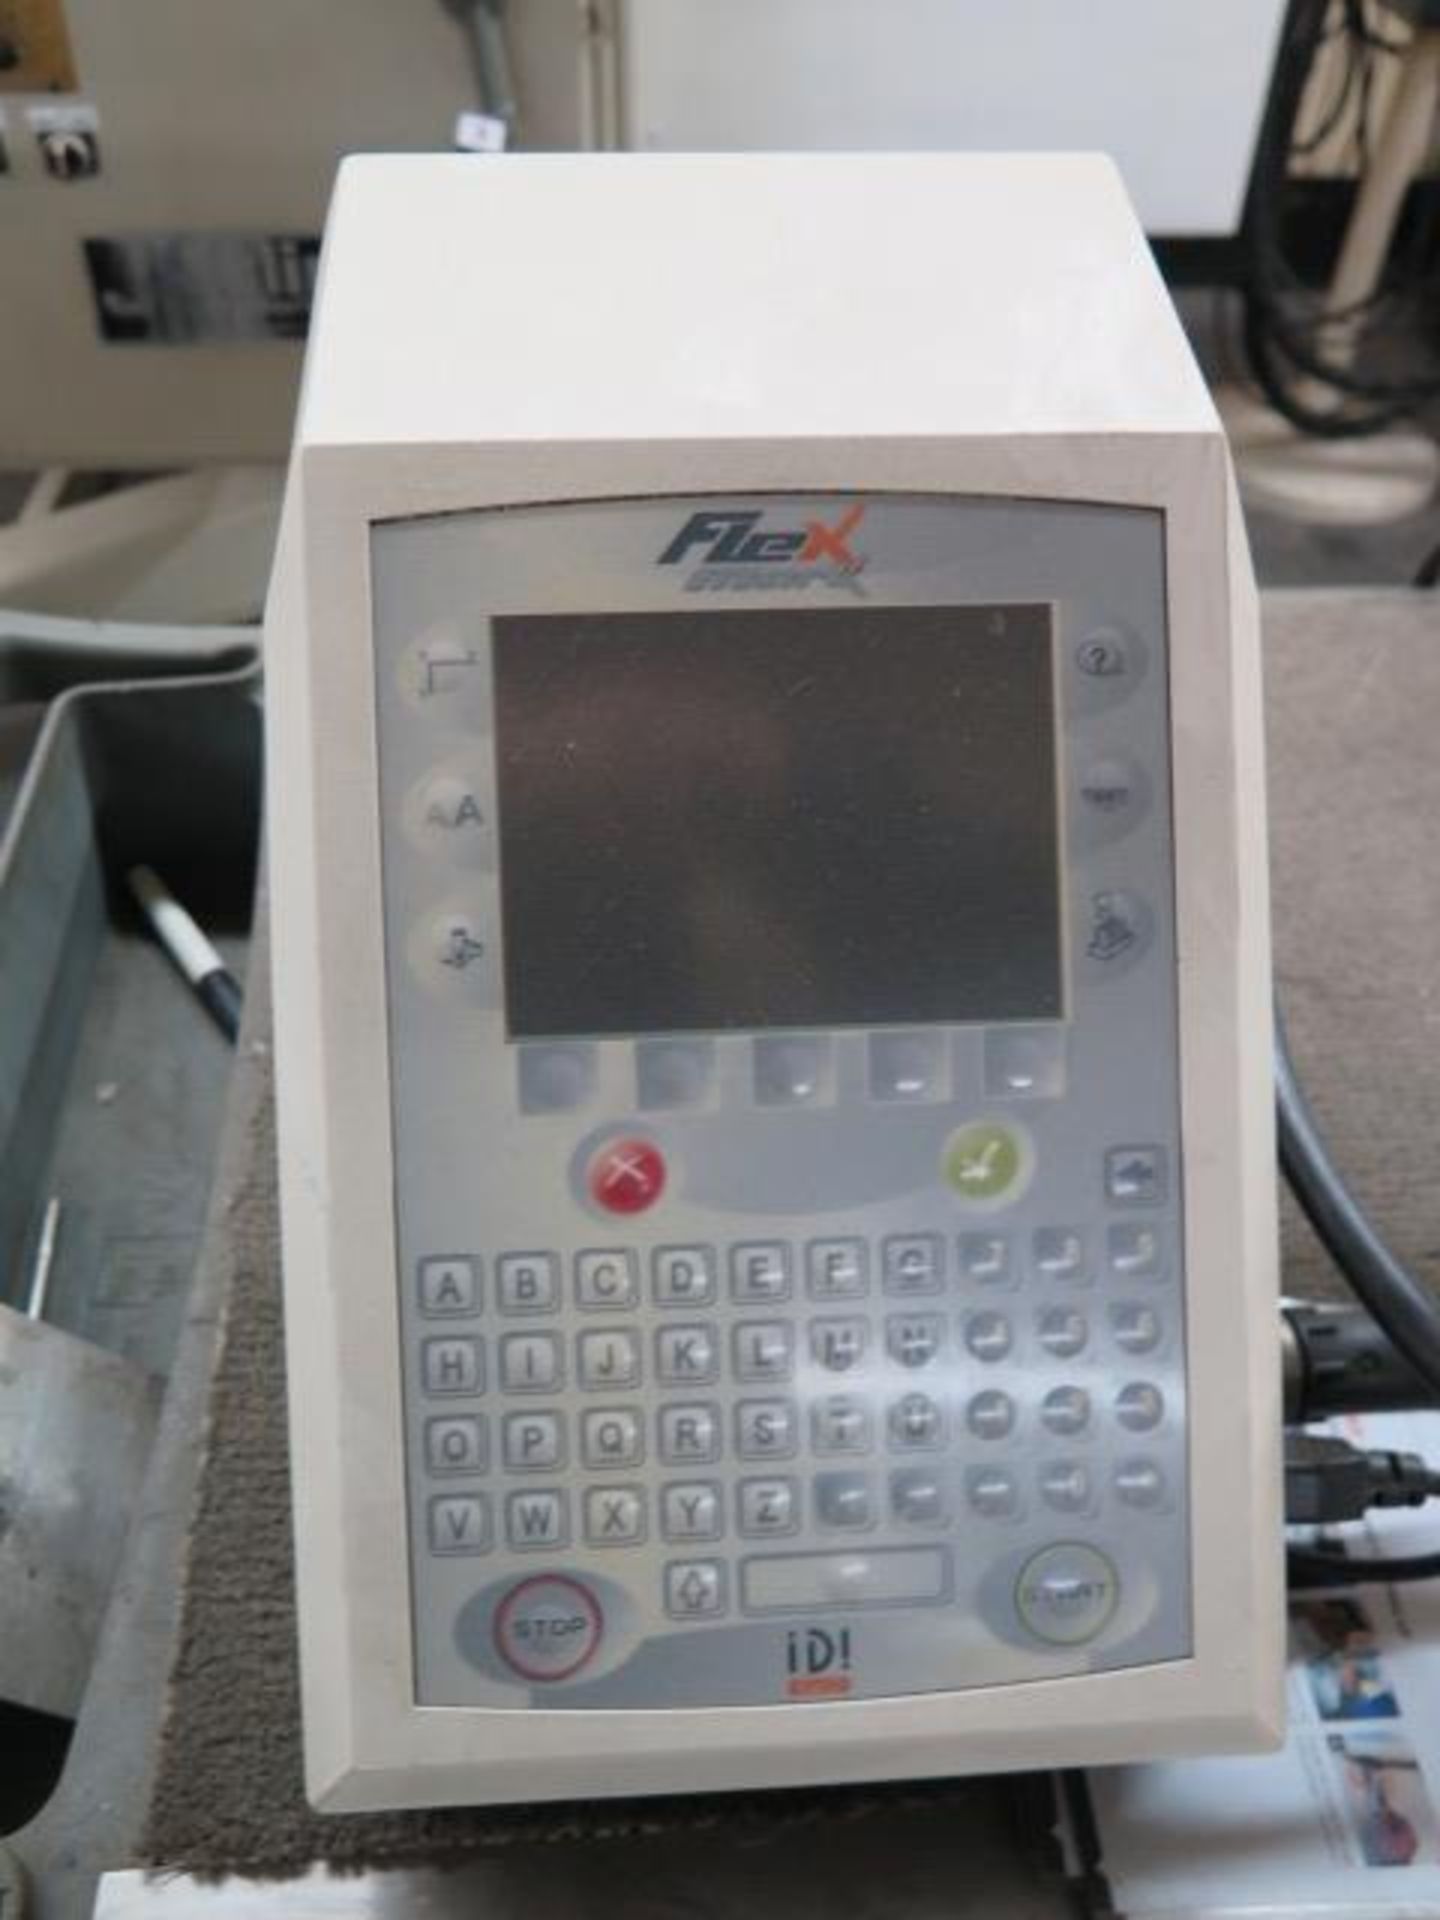 2013 Dapra Marking Systems “Flex Mark” Peen Engraving System w/ PLC Controls, SOLD AS IS - Image 6 of 8